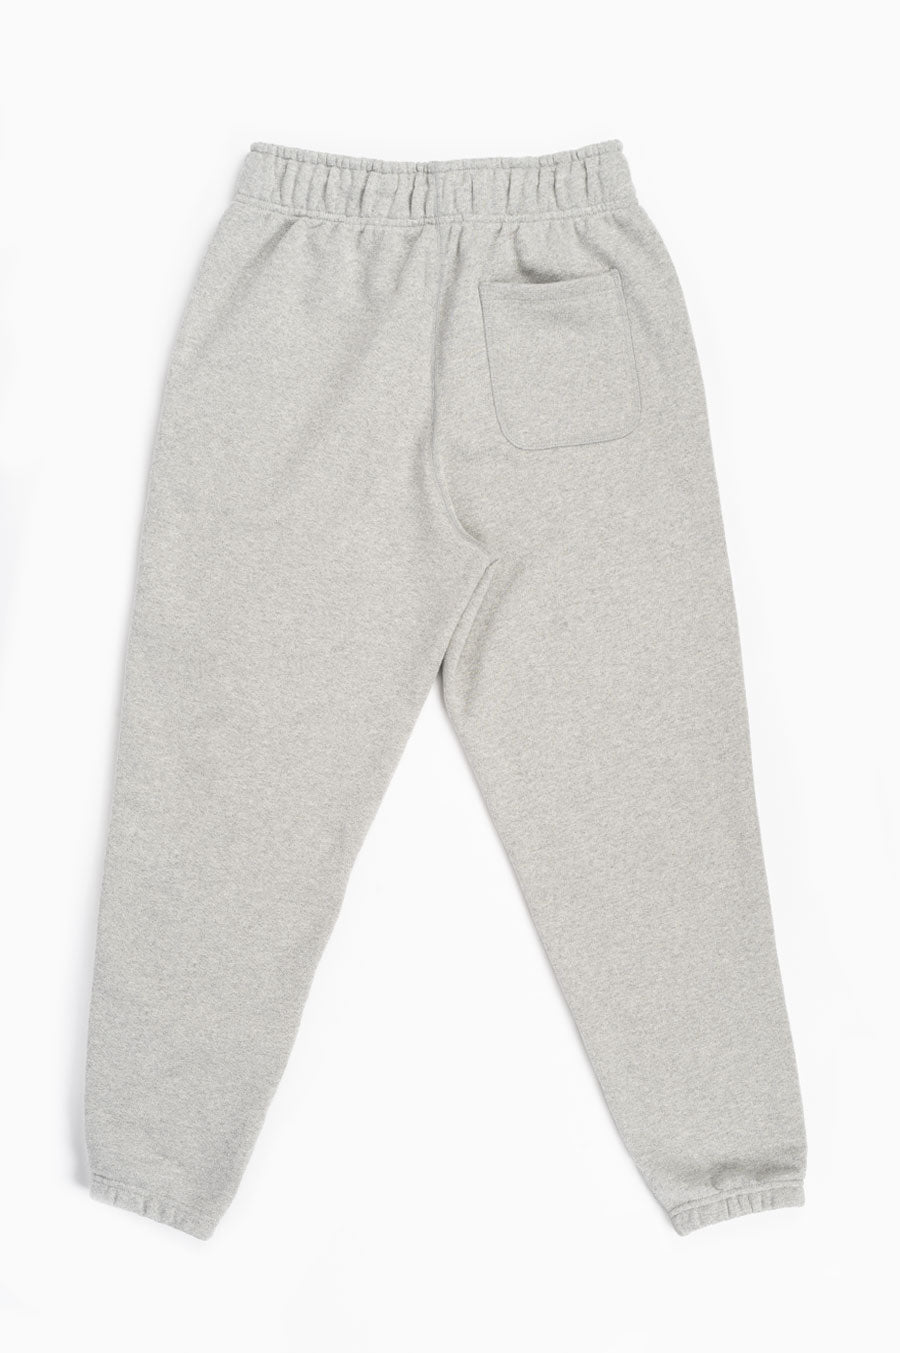 NEW BALANCE MADE IN GREY USA – ATHLETIC BLENDS SWEATPANT